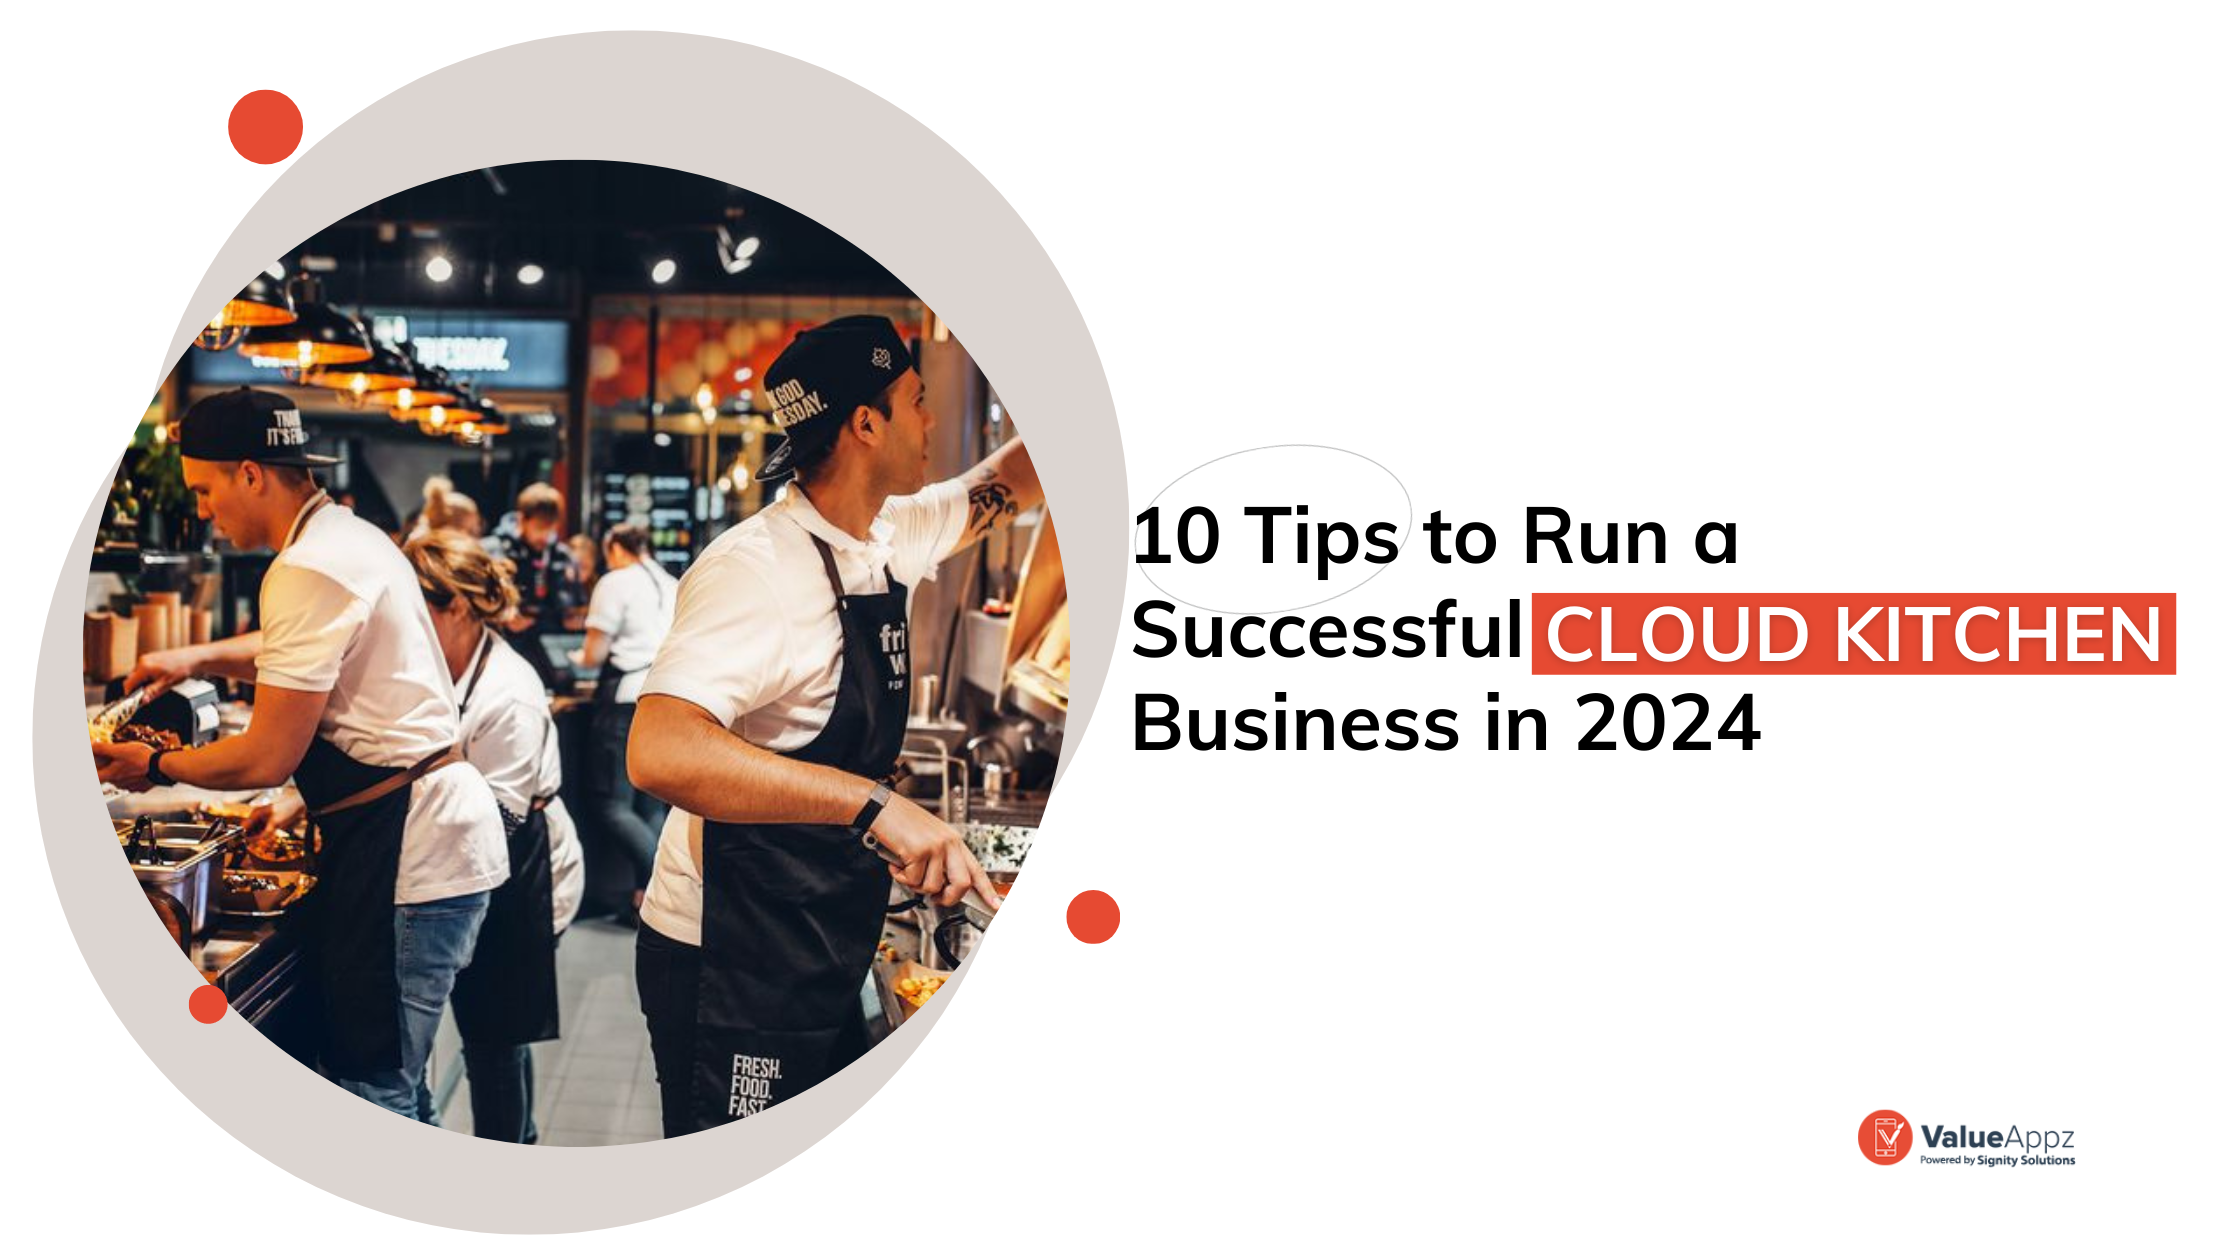 10 Tips to Run a Successful Cloud Kitchen Business in 2024